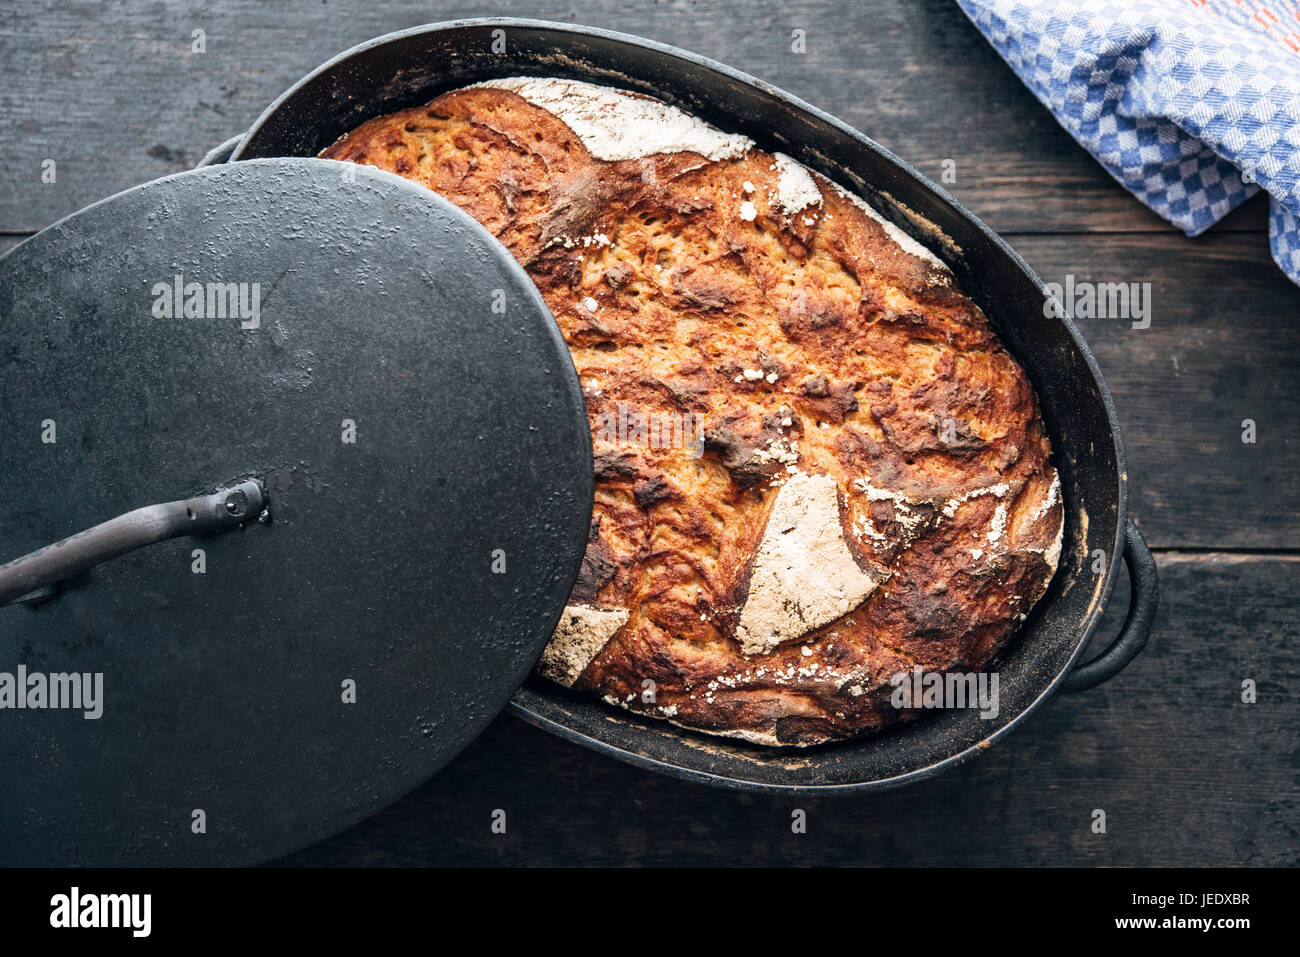 Potato Malt Bread with rye and sourdough, baked in an old iron cast pot Stock Photo